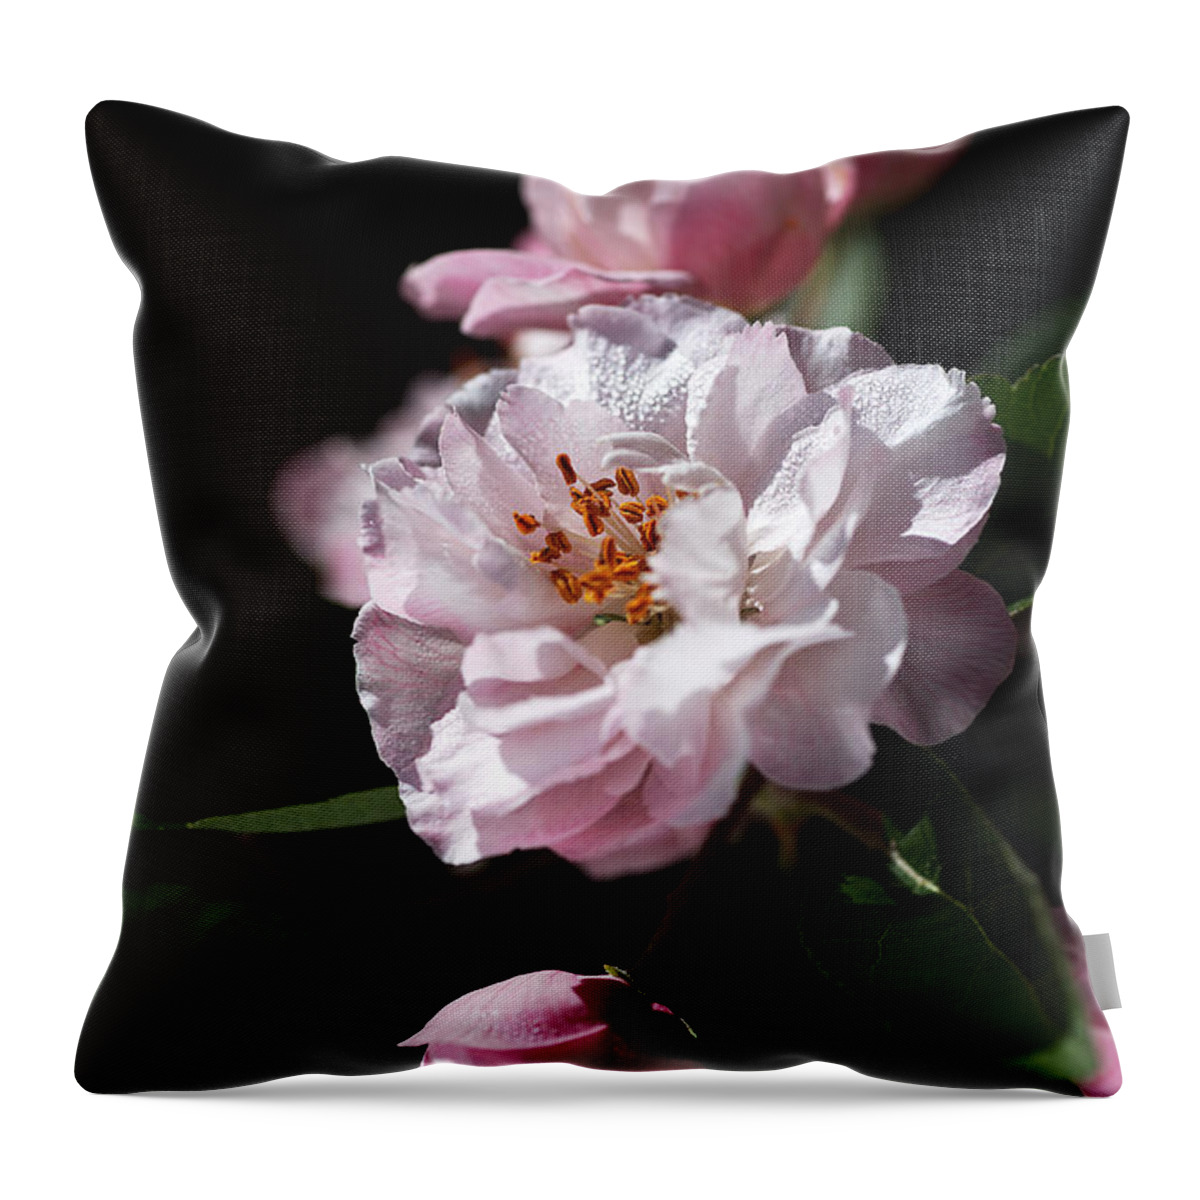 Bubbleblue Throw Pillow featuring the photograph Crabapple Flowers by Joy Watson